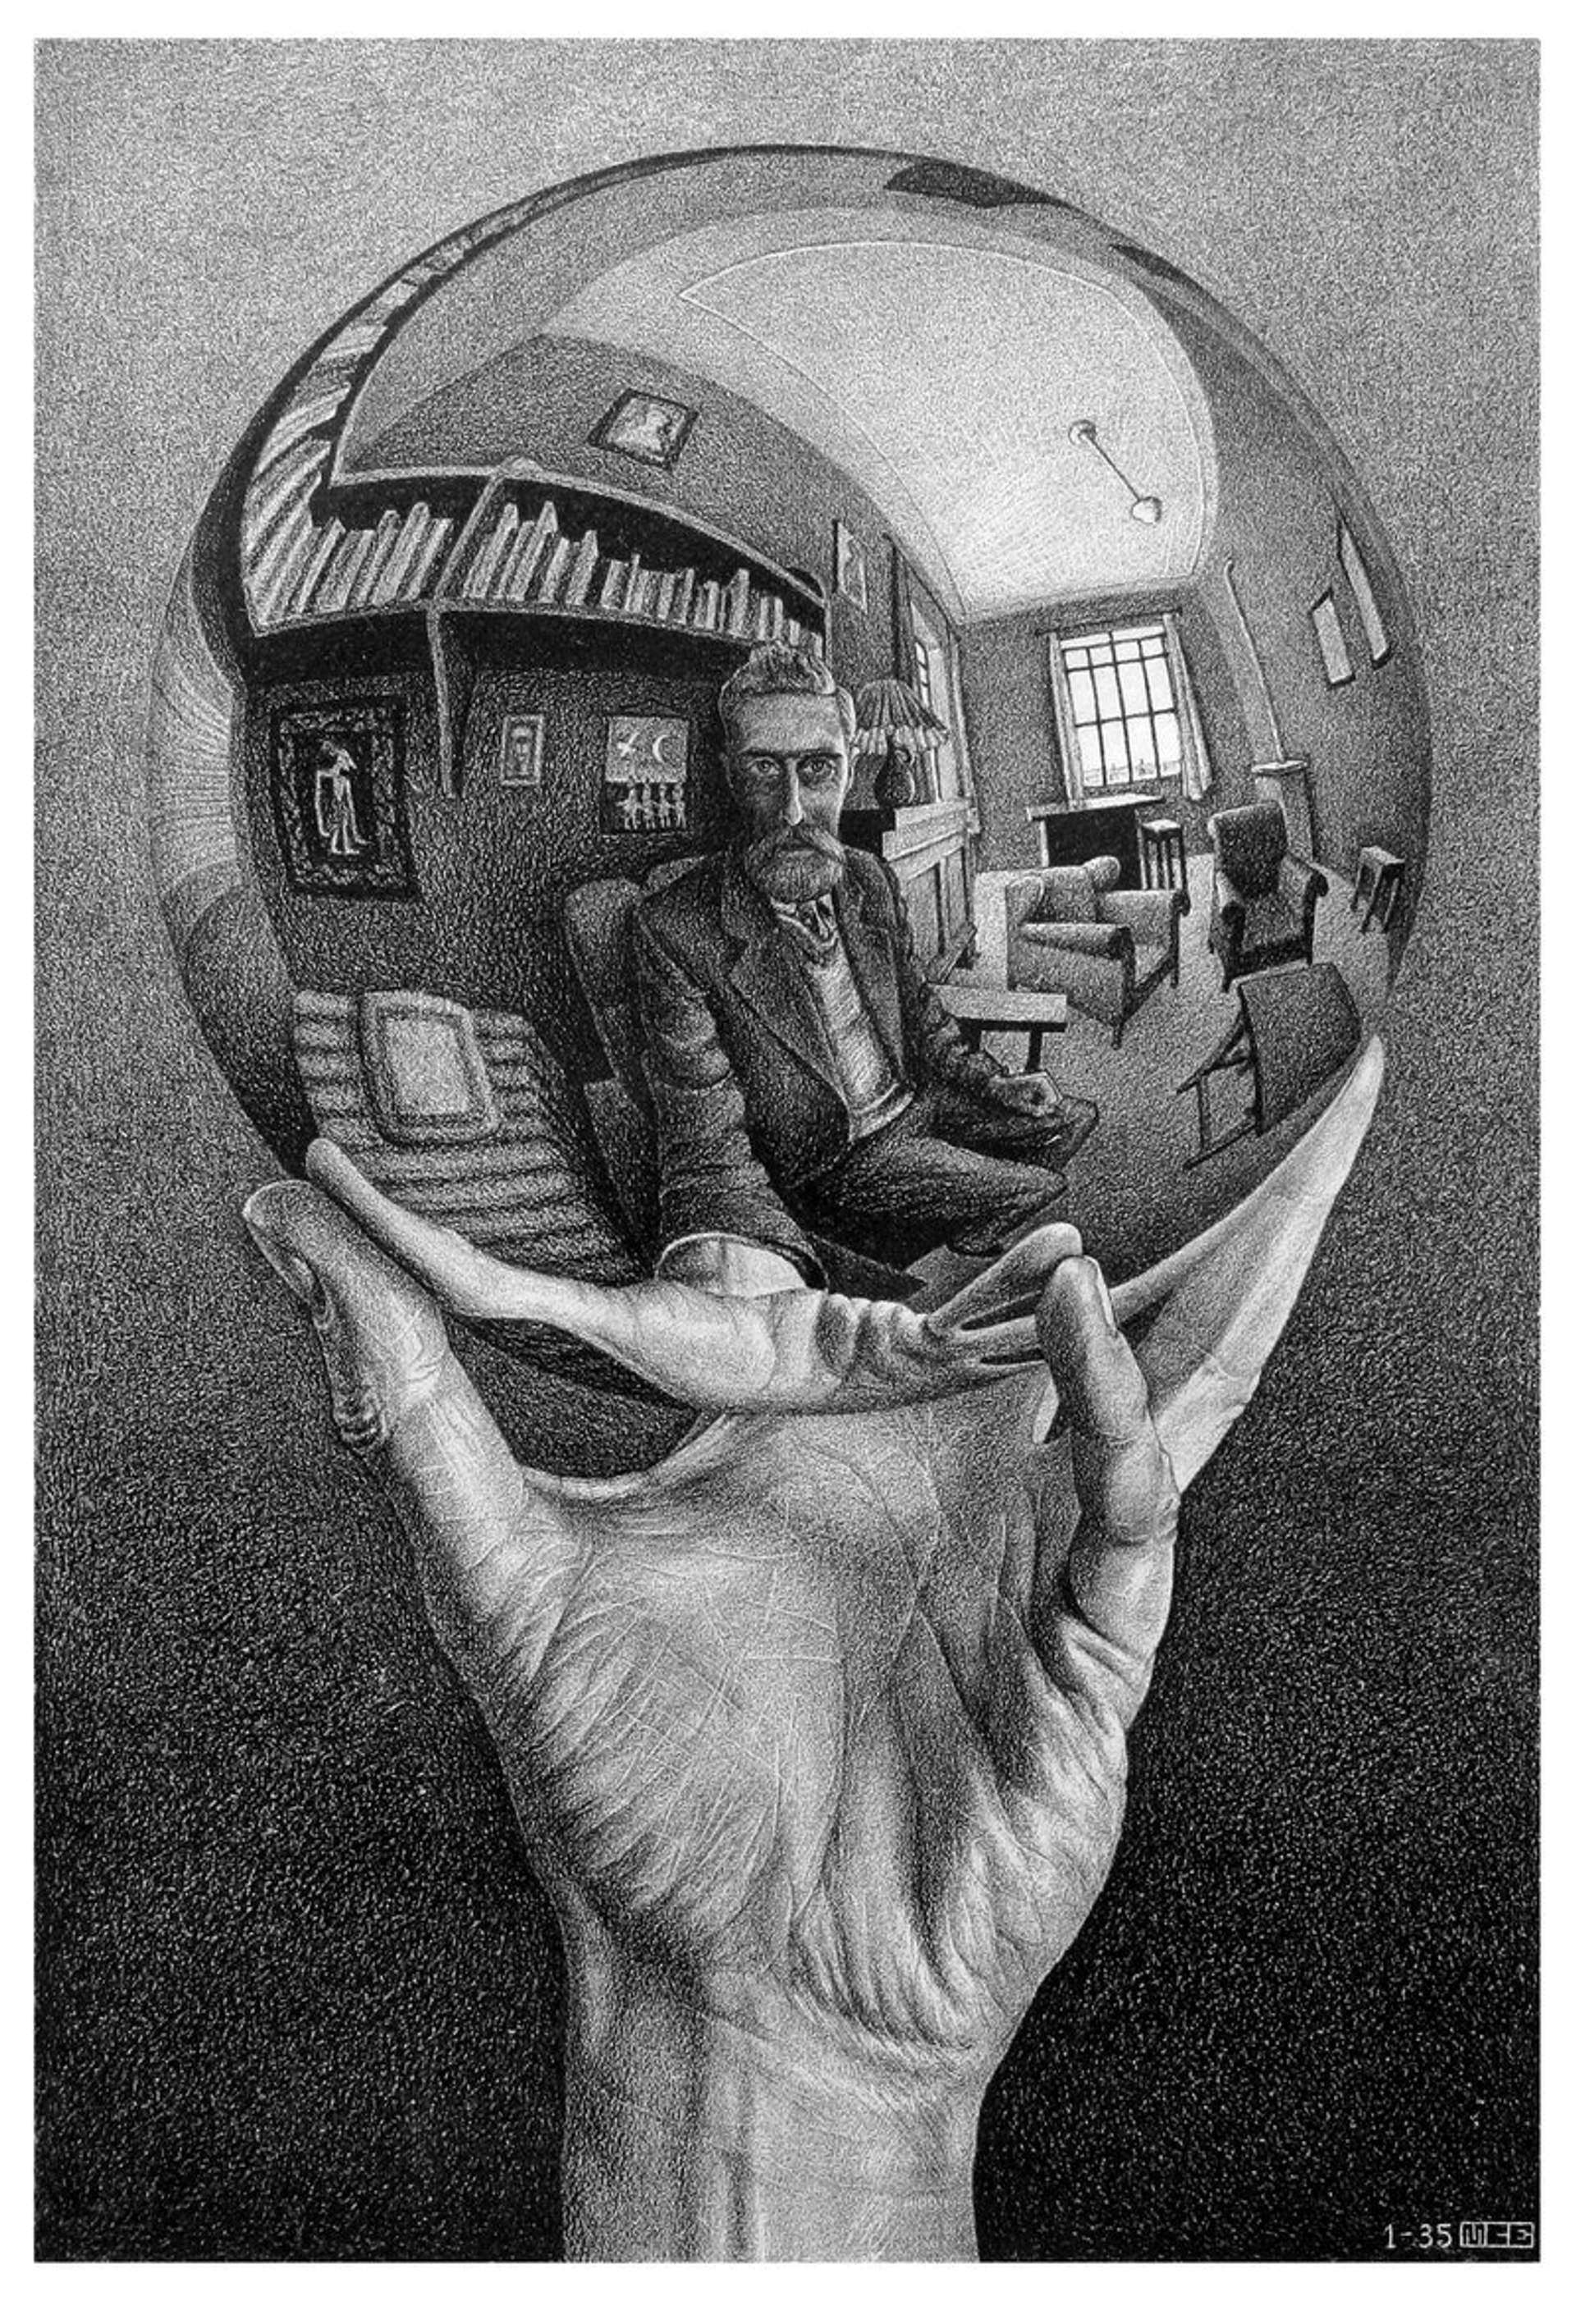 Black & white hand holding a reflective sphere where we can see an older man in a suit and glasses reflected